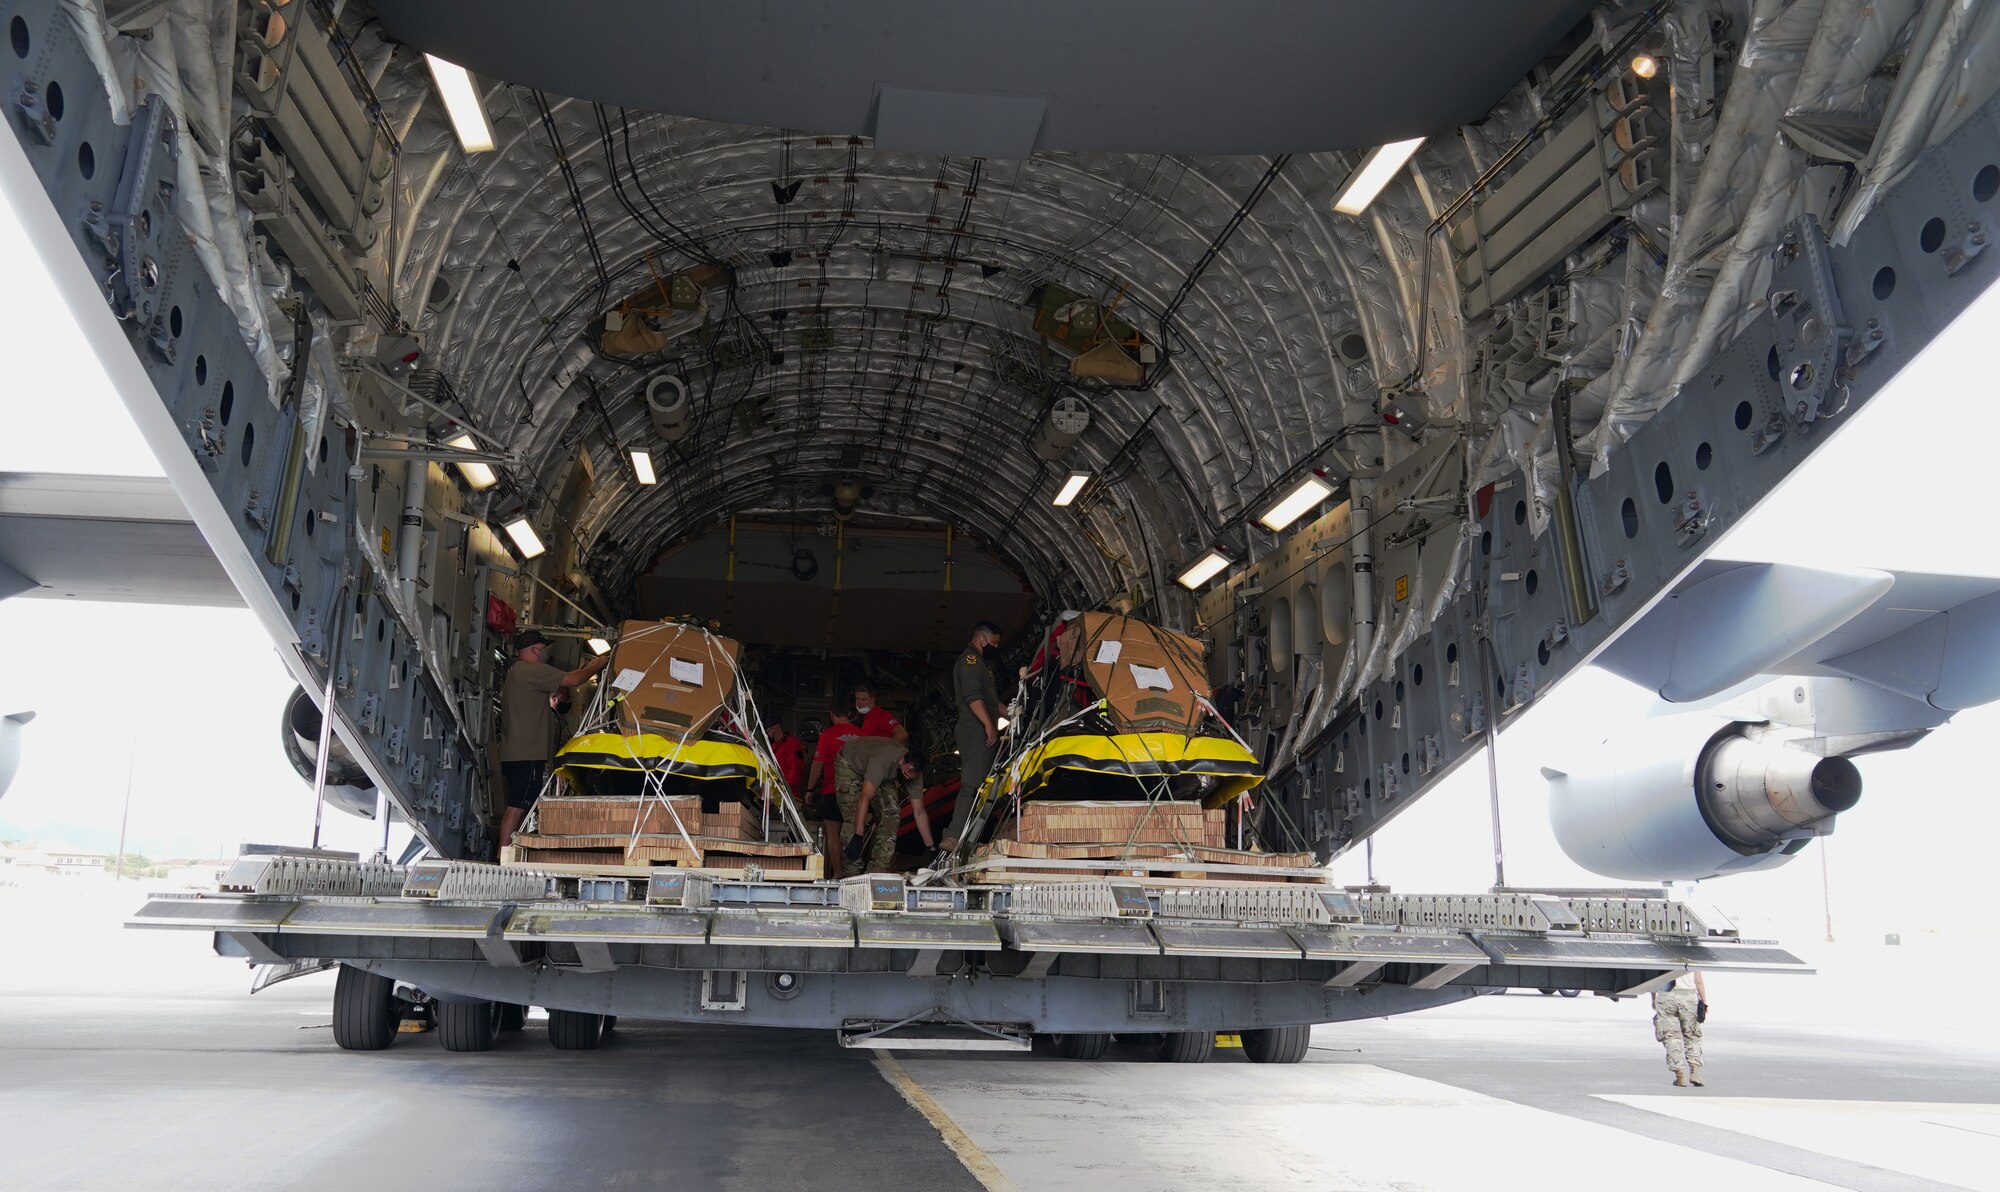 U.S. Air Force 647th Logistics Readiness Squadron and Pararescue Airmen prepare a C-17 Globemaster III for NASA’s SpaceX Demonstration Mission 2 on Joint Base Pearl Harbor-Hickam, Hawaii, May 26th, 2020. In preparation for the historic launch of a manned crew into space, several units from Team Hickam assisted the deployment of U.S. Air Force Guardian Angel Pararescue forces from the 58th Rescue Squadron, Nellis Air Force Base, Nevada as part of Task Force 45, facilitated by 45th Operations Group, Detachment 3, Human Space Flight Support located at Patrick Air Force Base, Florida. (U.S. Air Force photo by Airman 1st Class Erin Baxter)